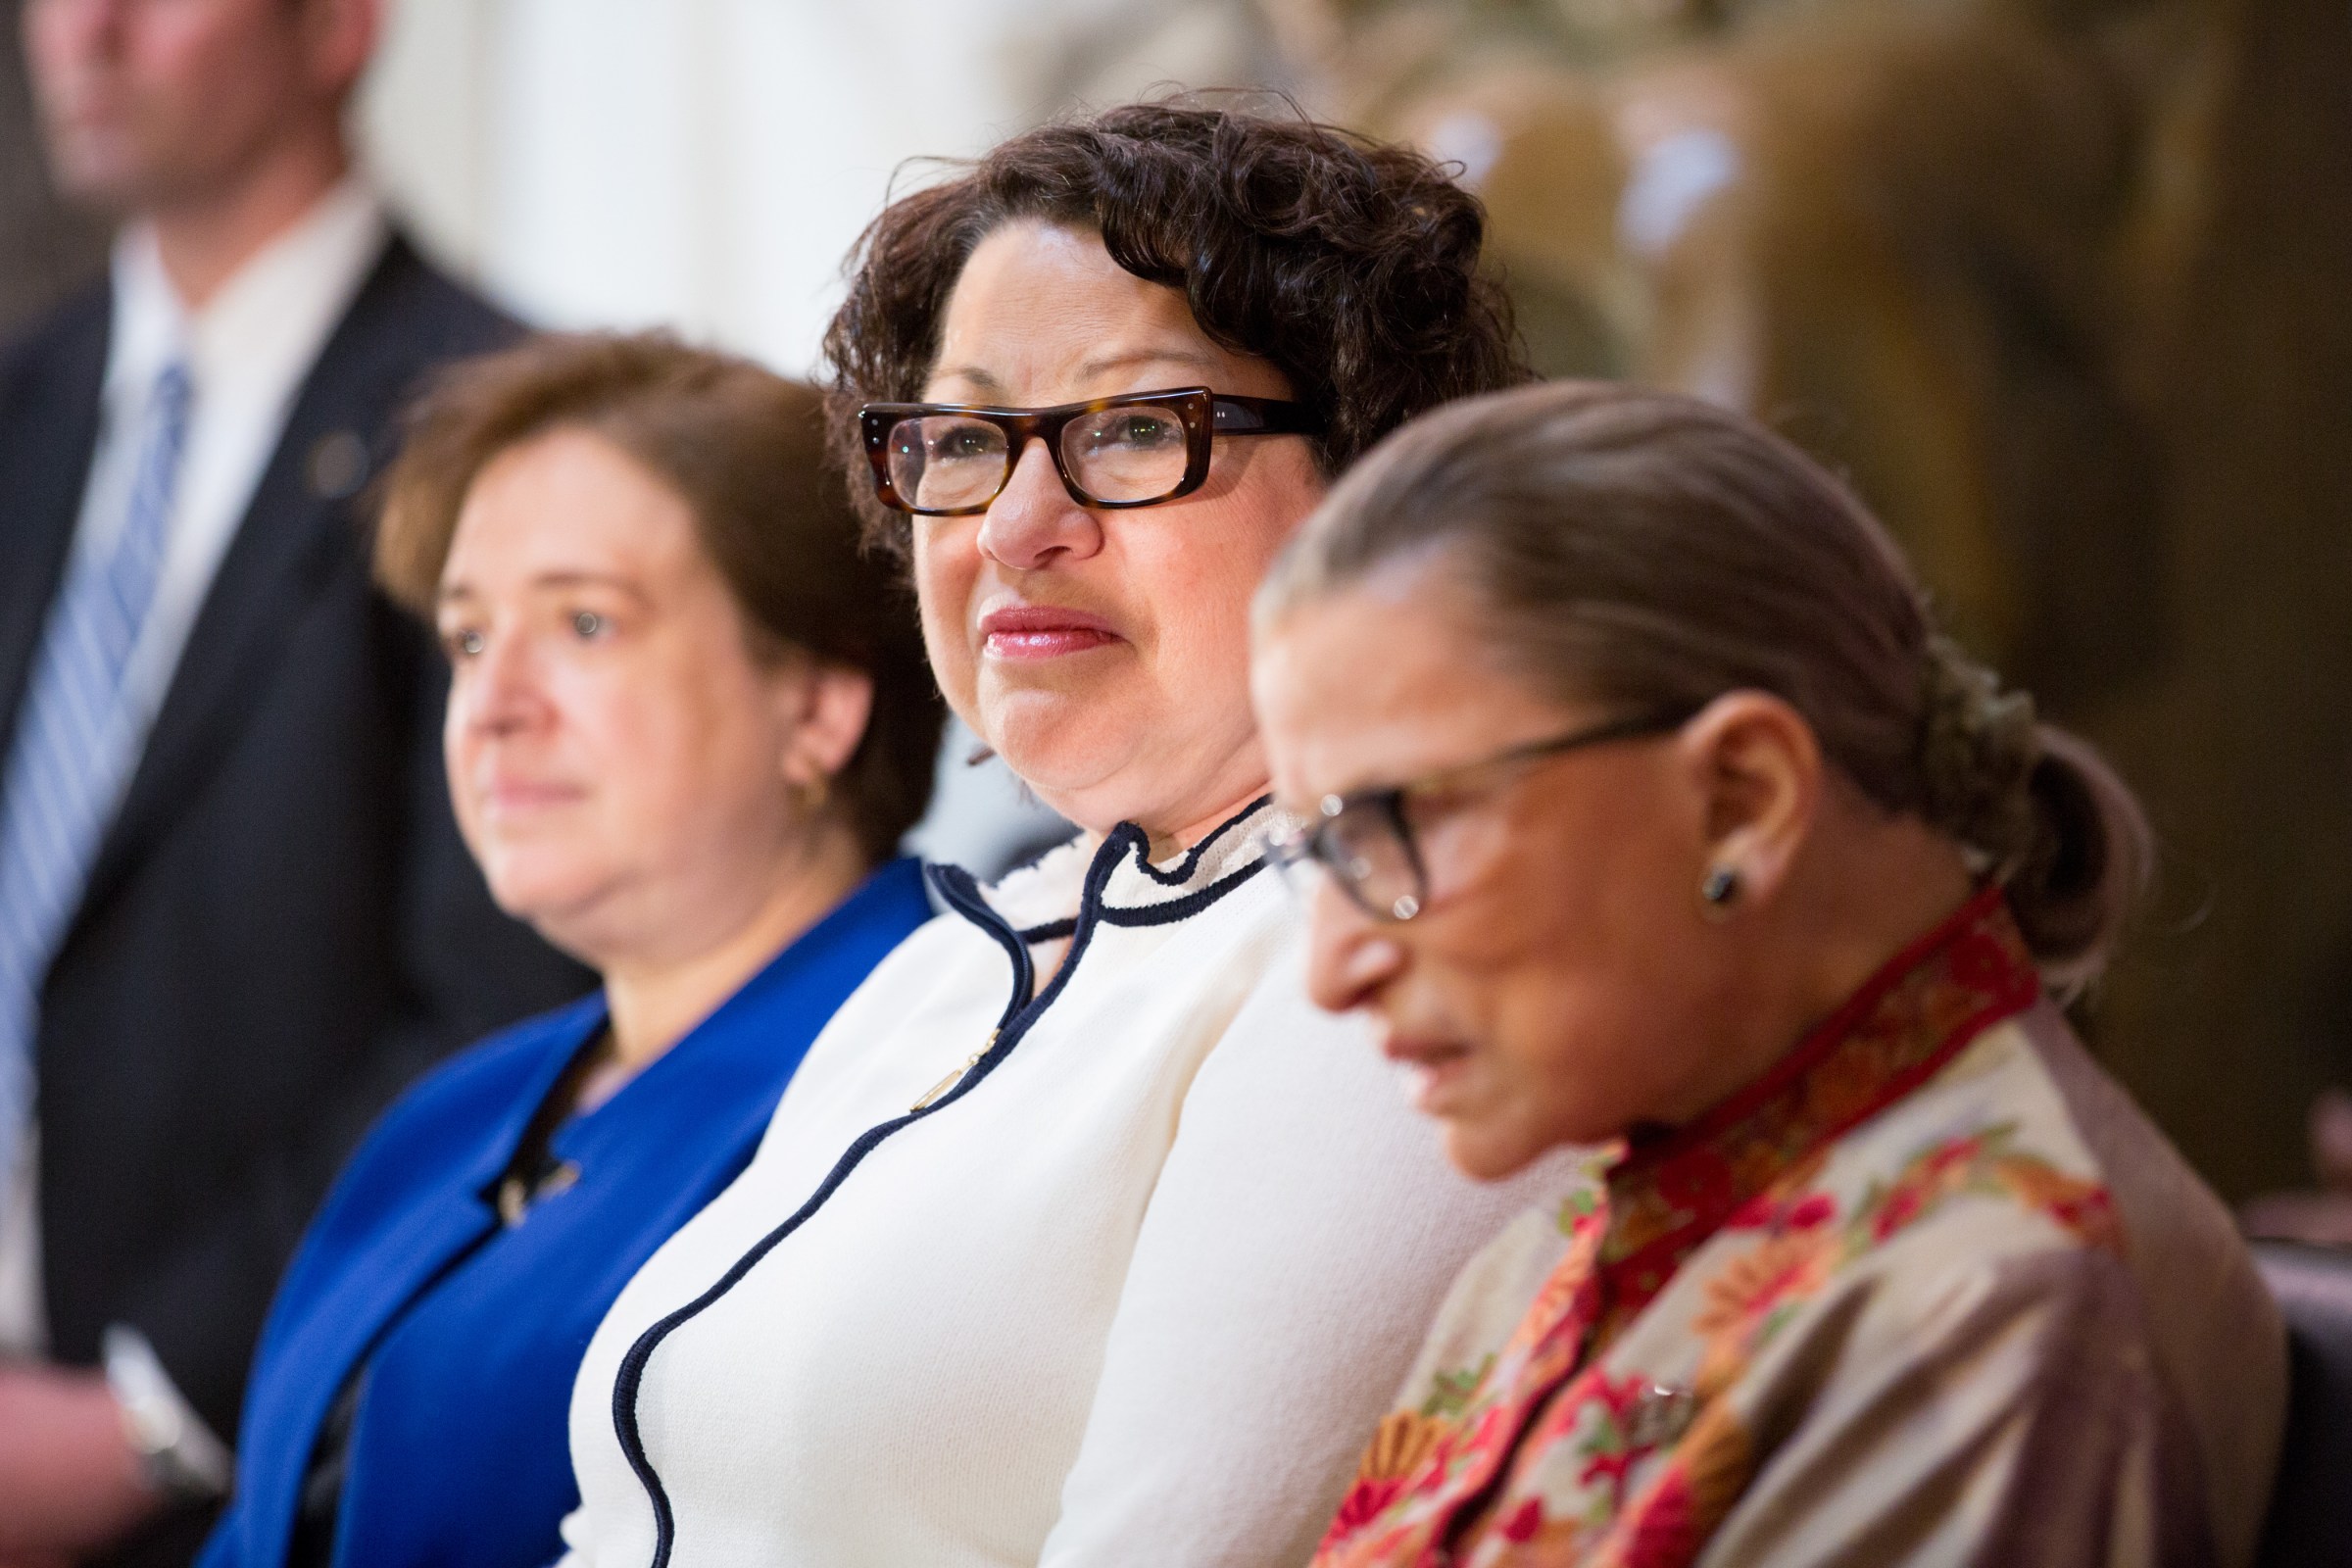 Justices Sotomayor and Kagan must retire now